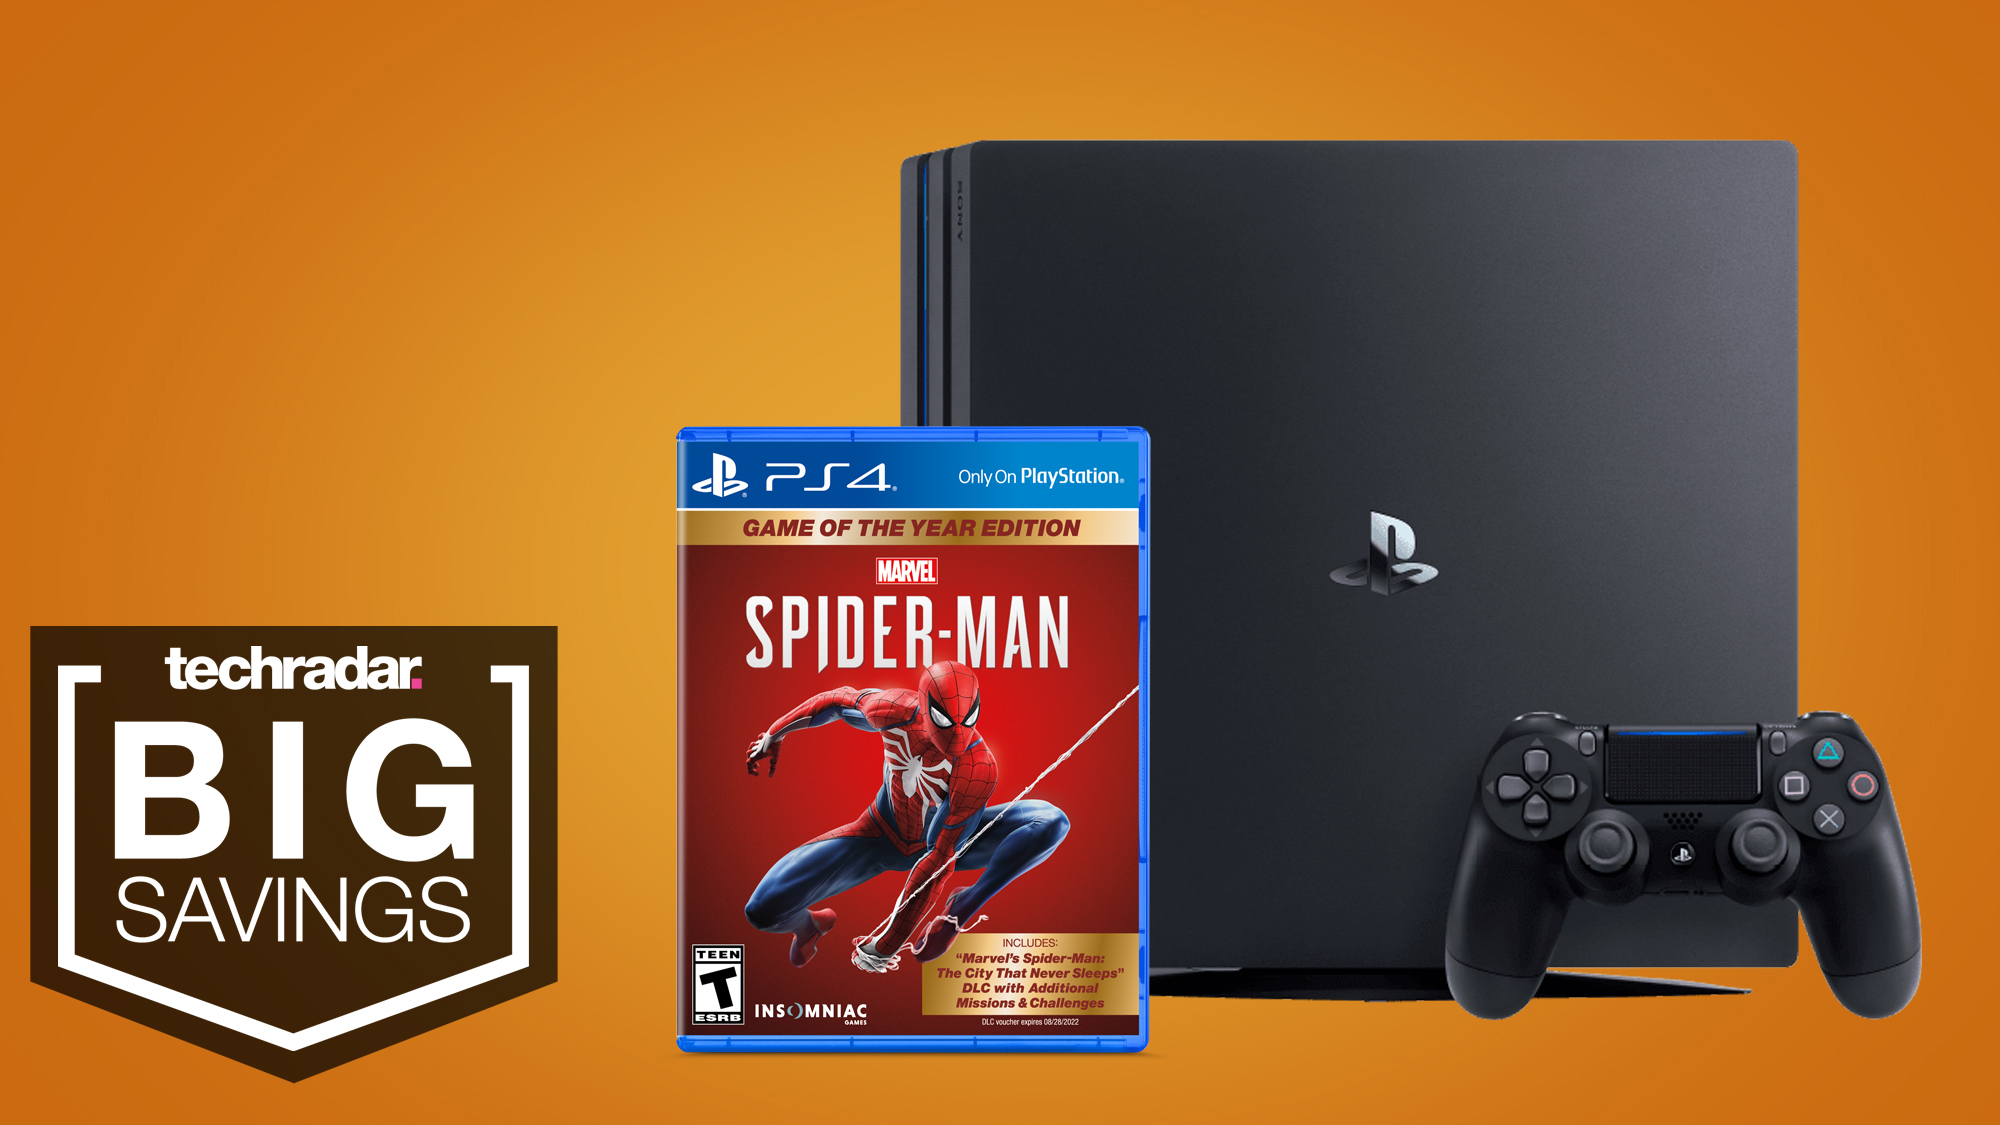 ps4 pro with spiderman game